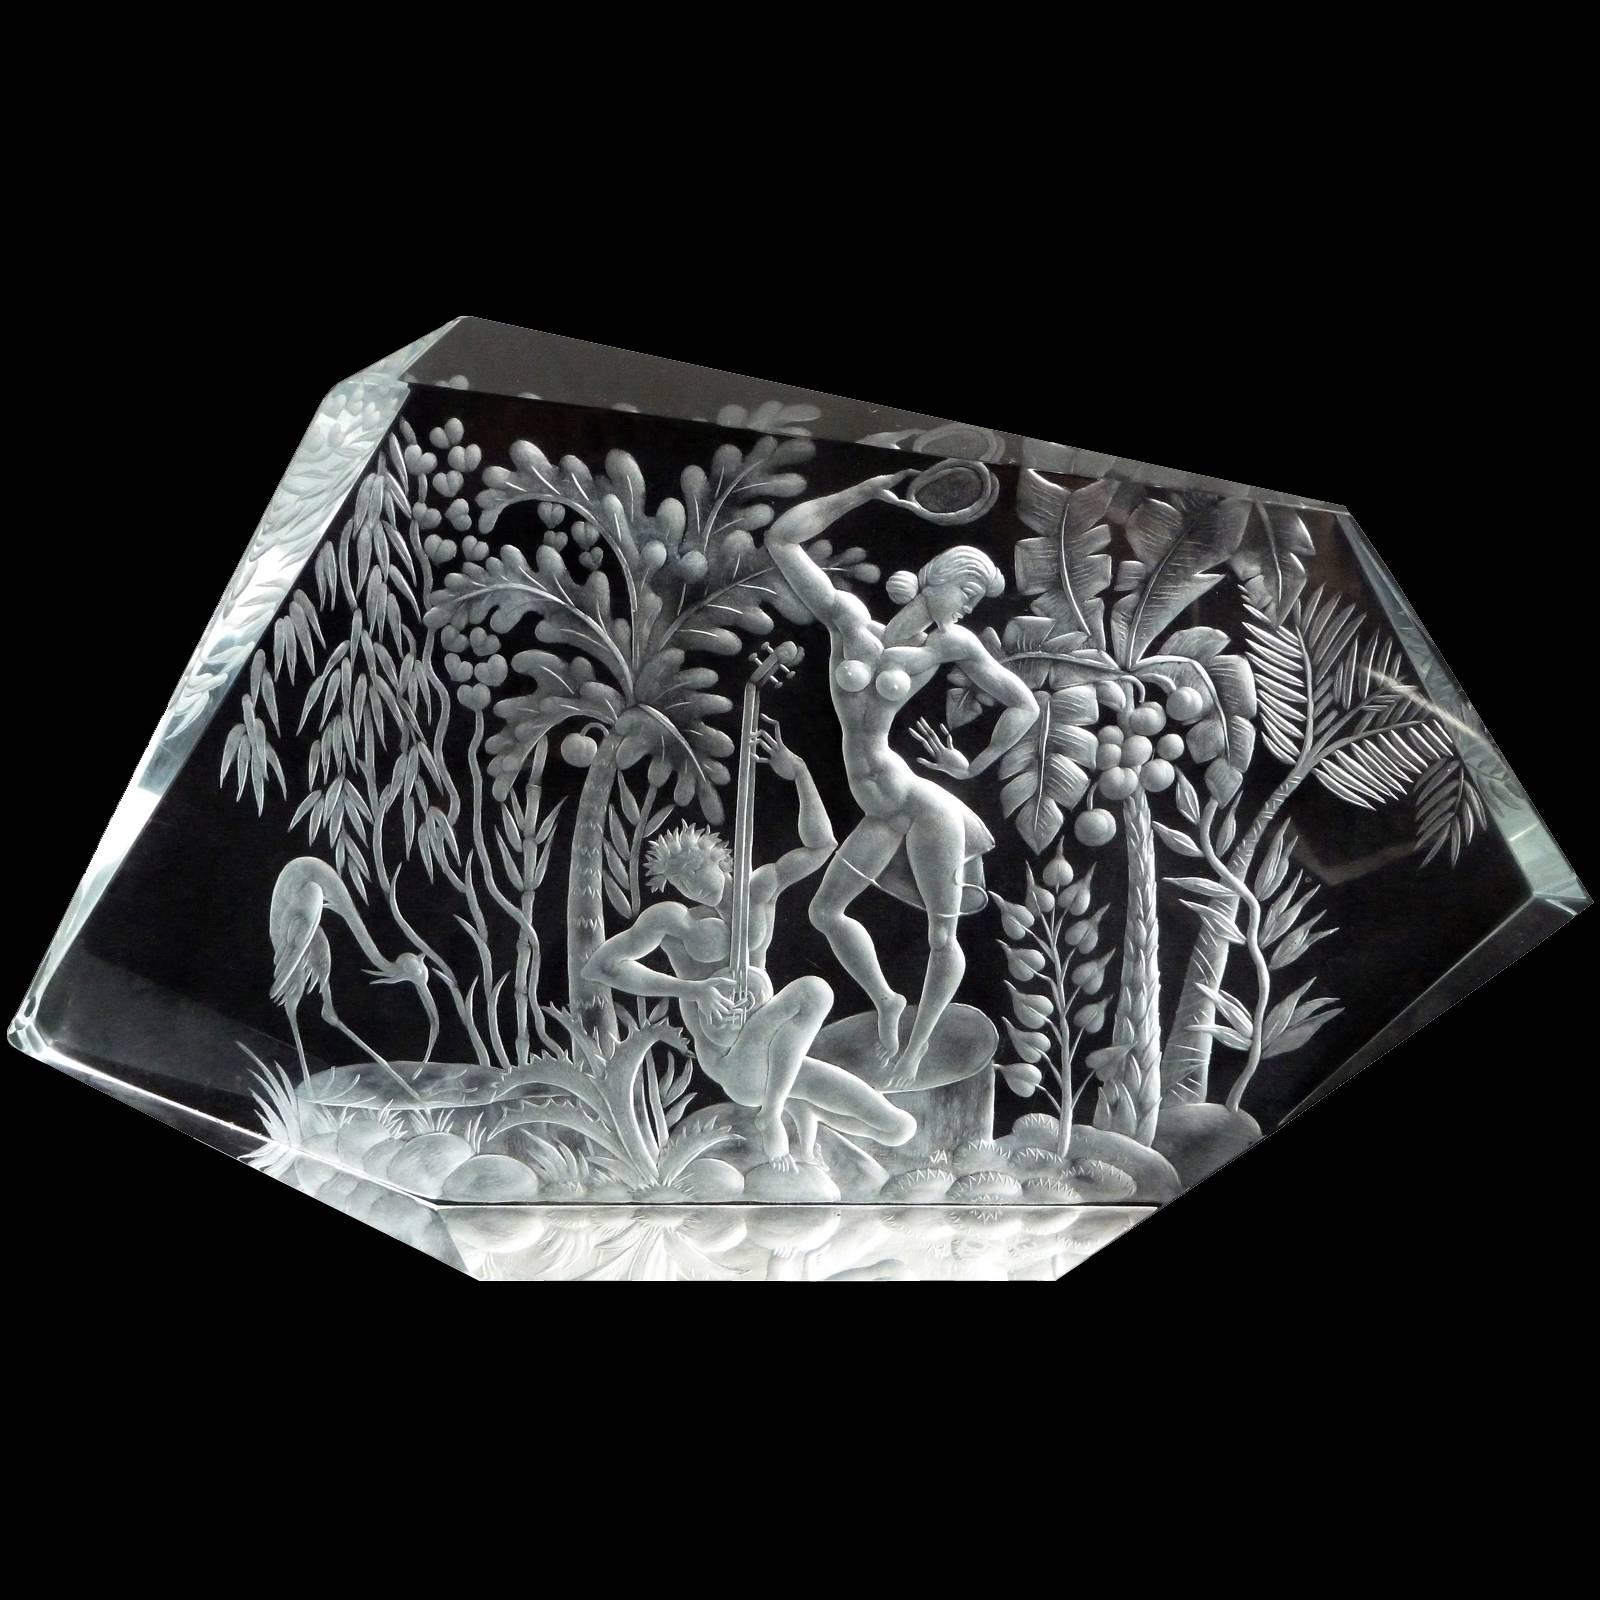 Exquisite, large etched tropical island nude male and female dance scene art sculpture in clear glass. Documented to the Exbor Company, signed on the side and stamped on the bottom. Created by designer/ engraver Josef Aschennbrenner with initials